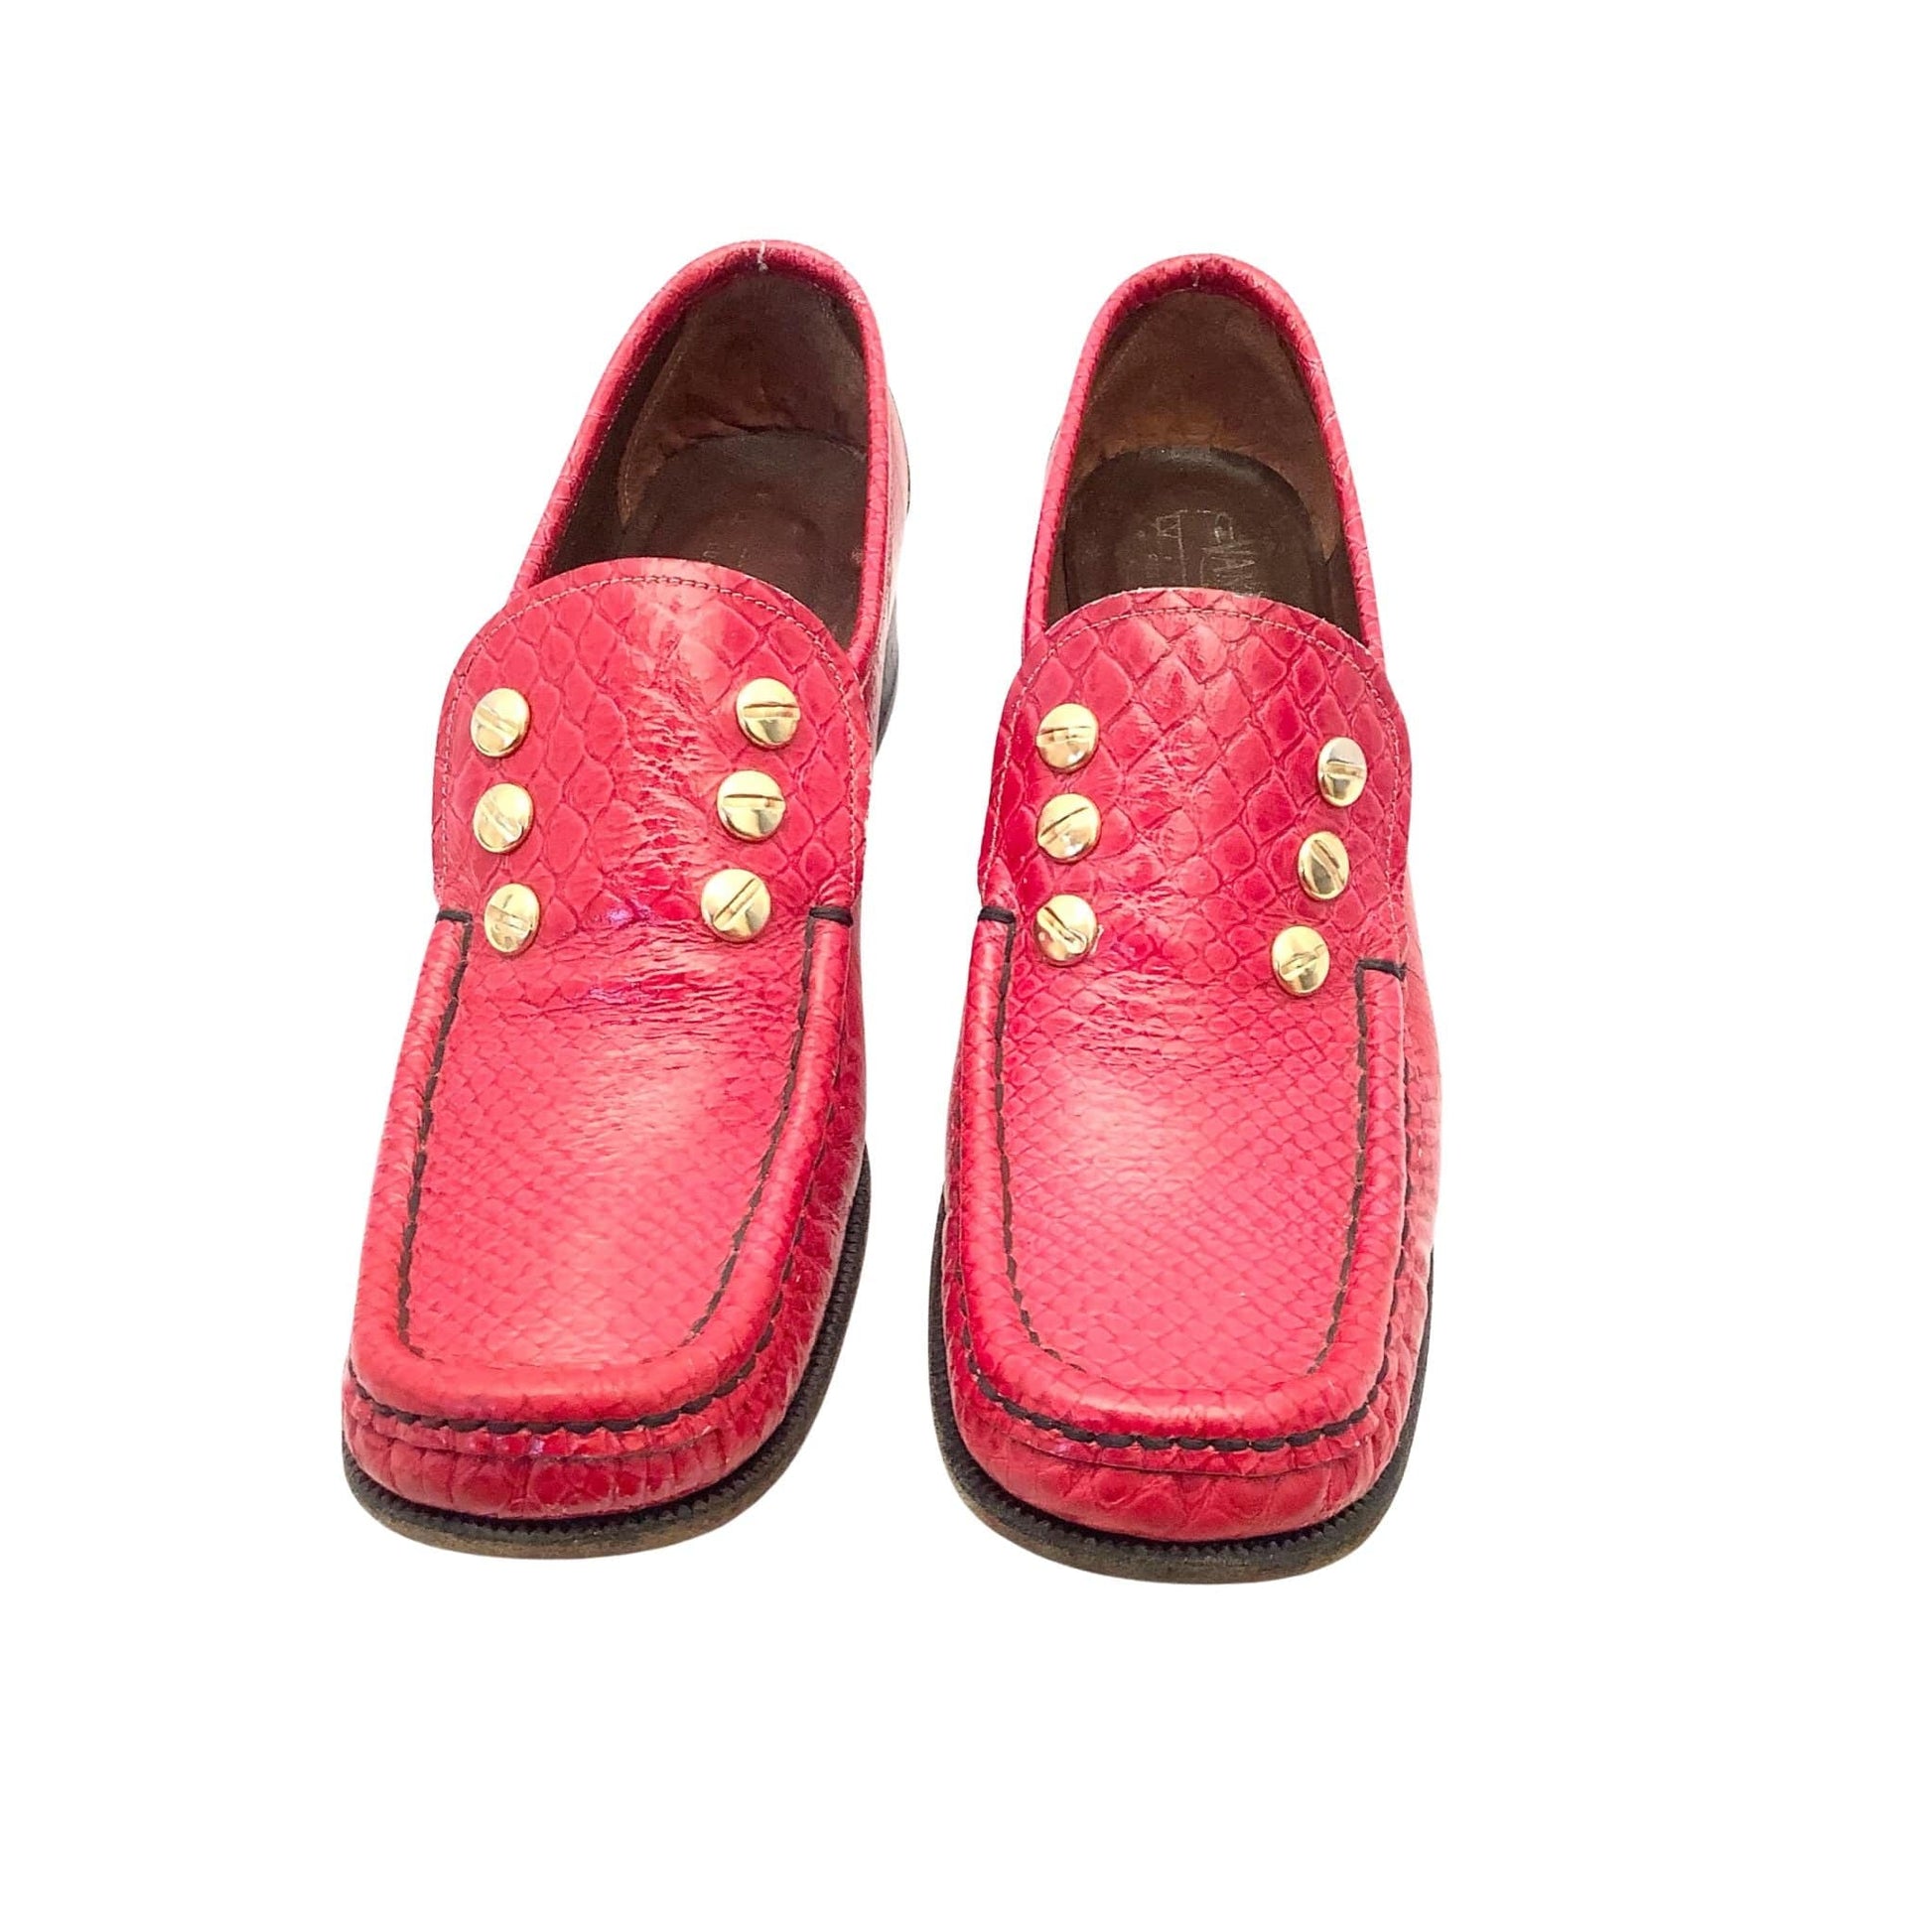 1970s Red Leather Loafers 7 / Red